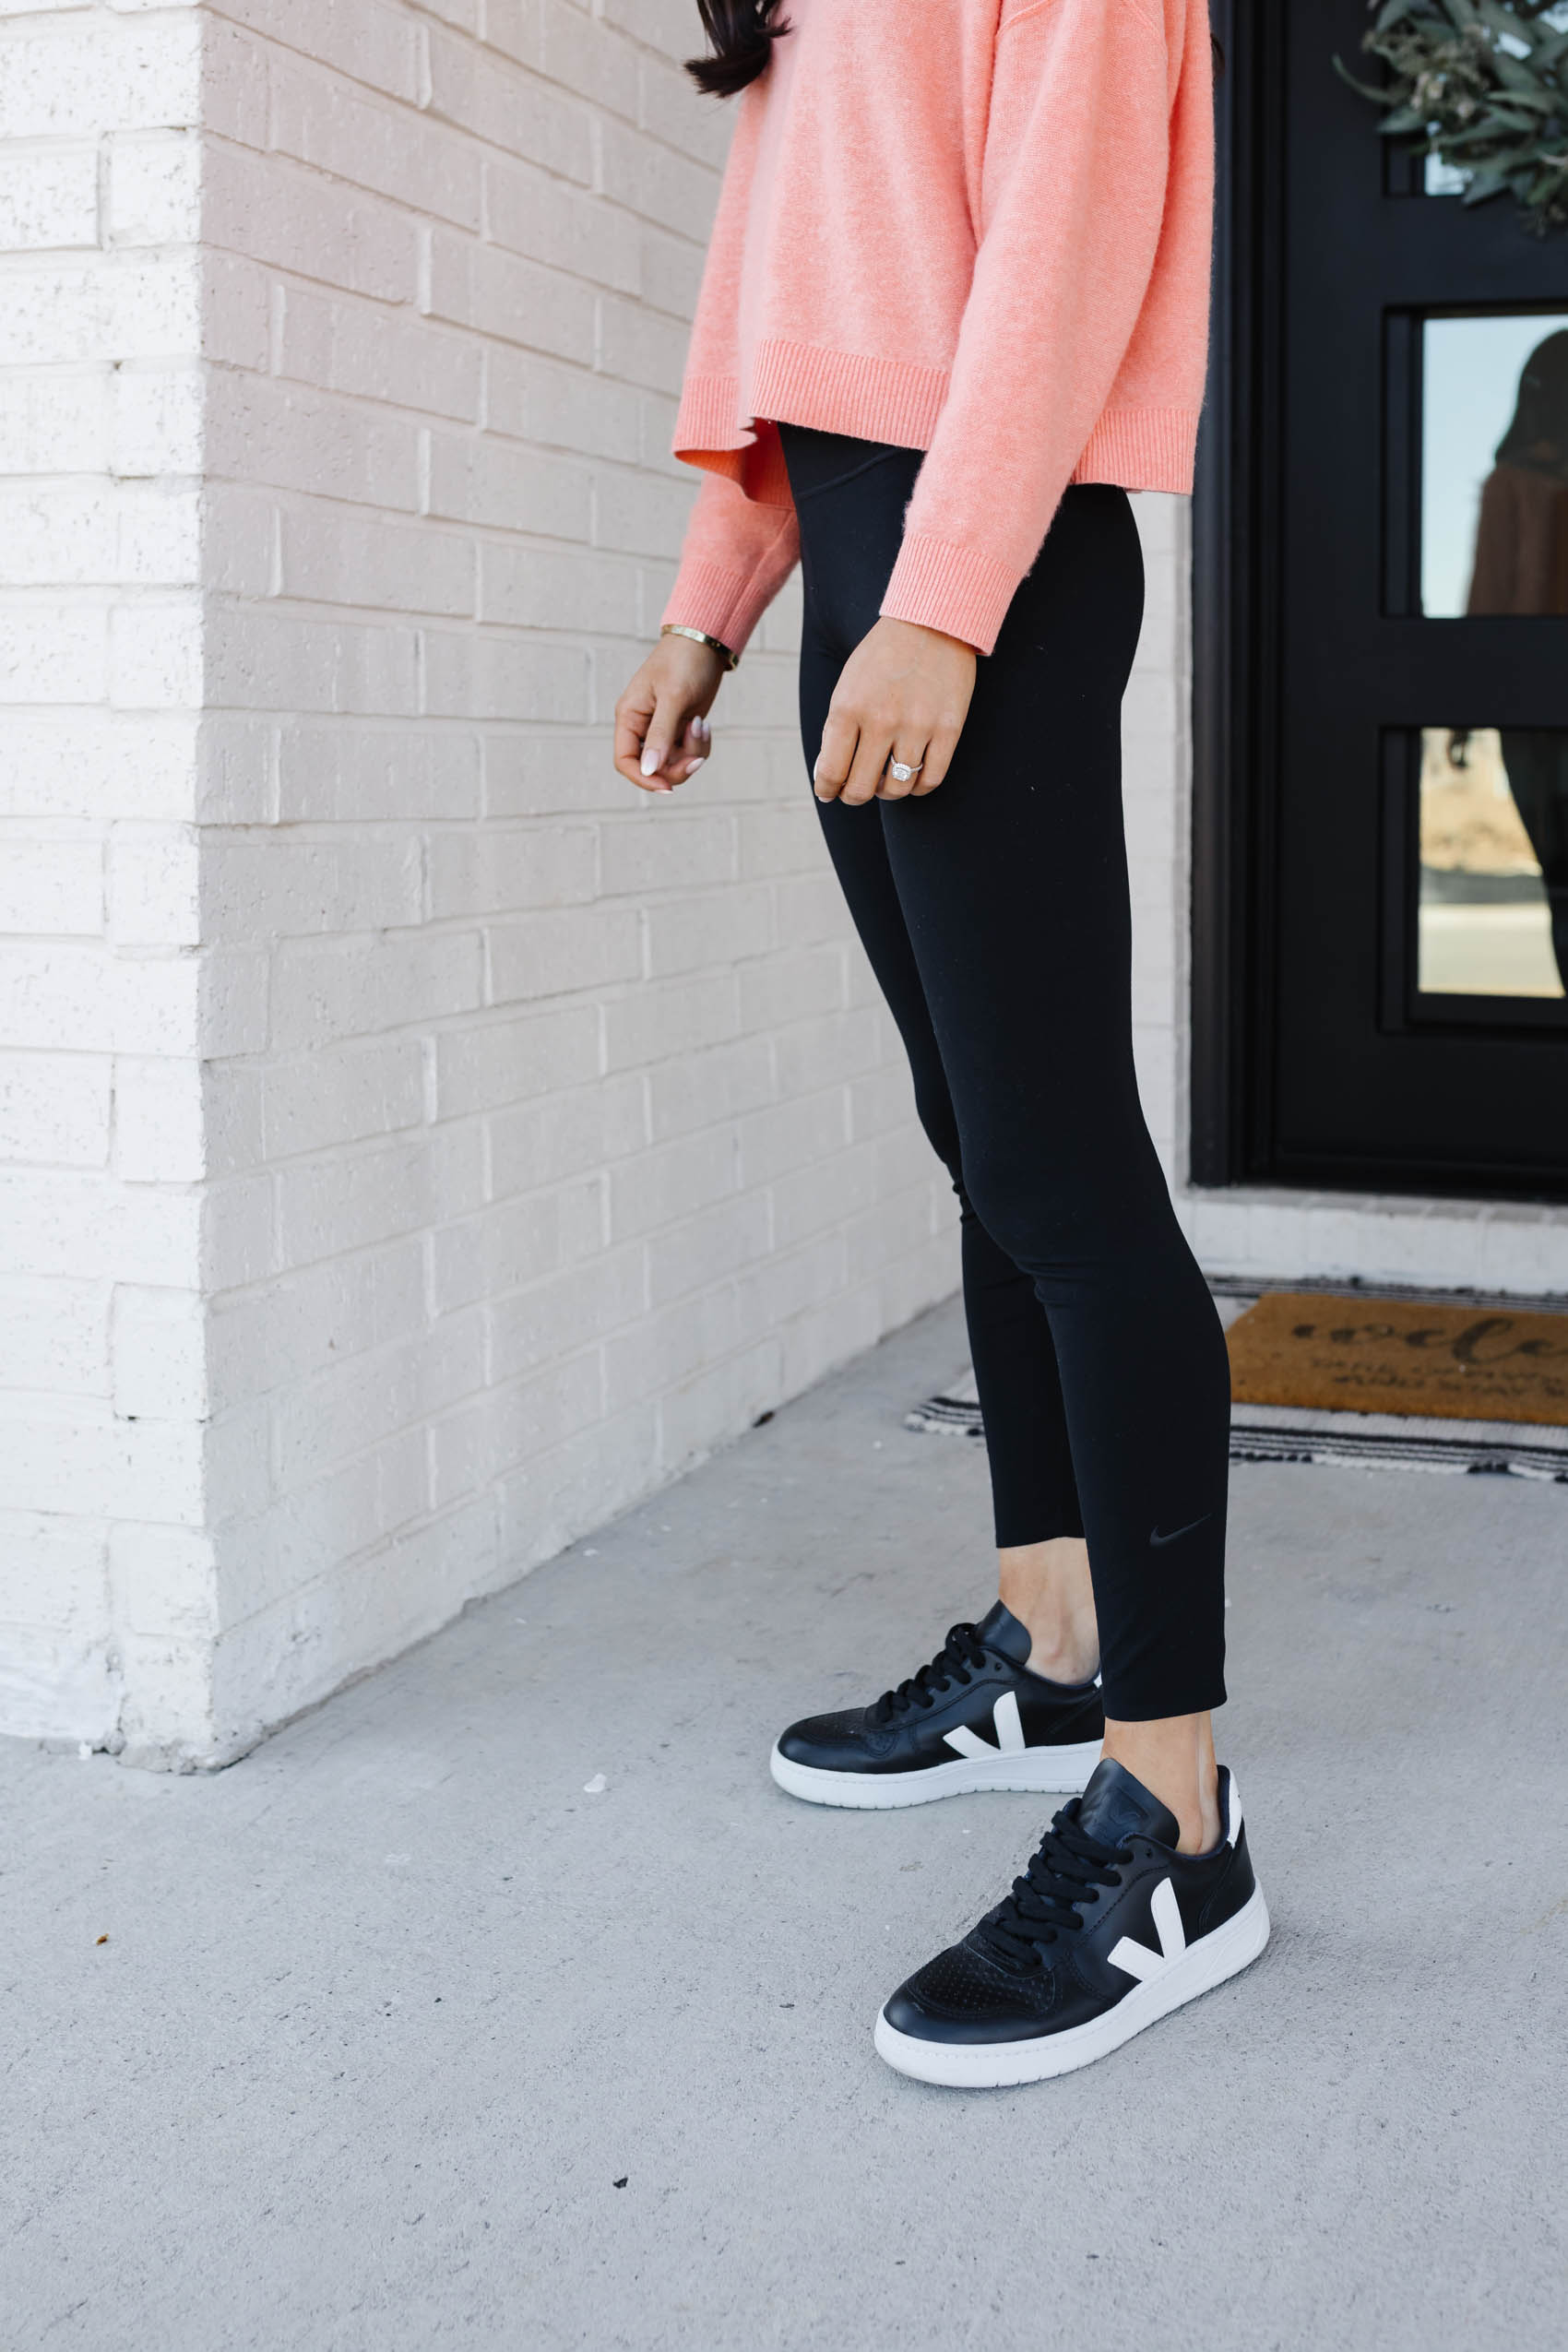 The Two Leggings I Can't Stop Wearing - Color & Chic